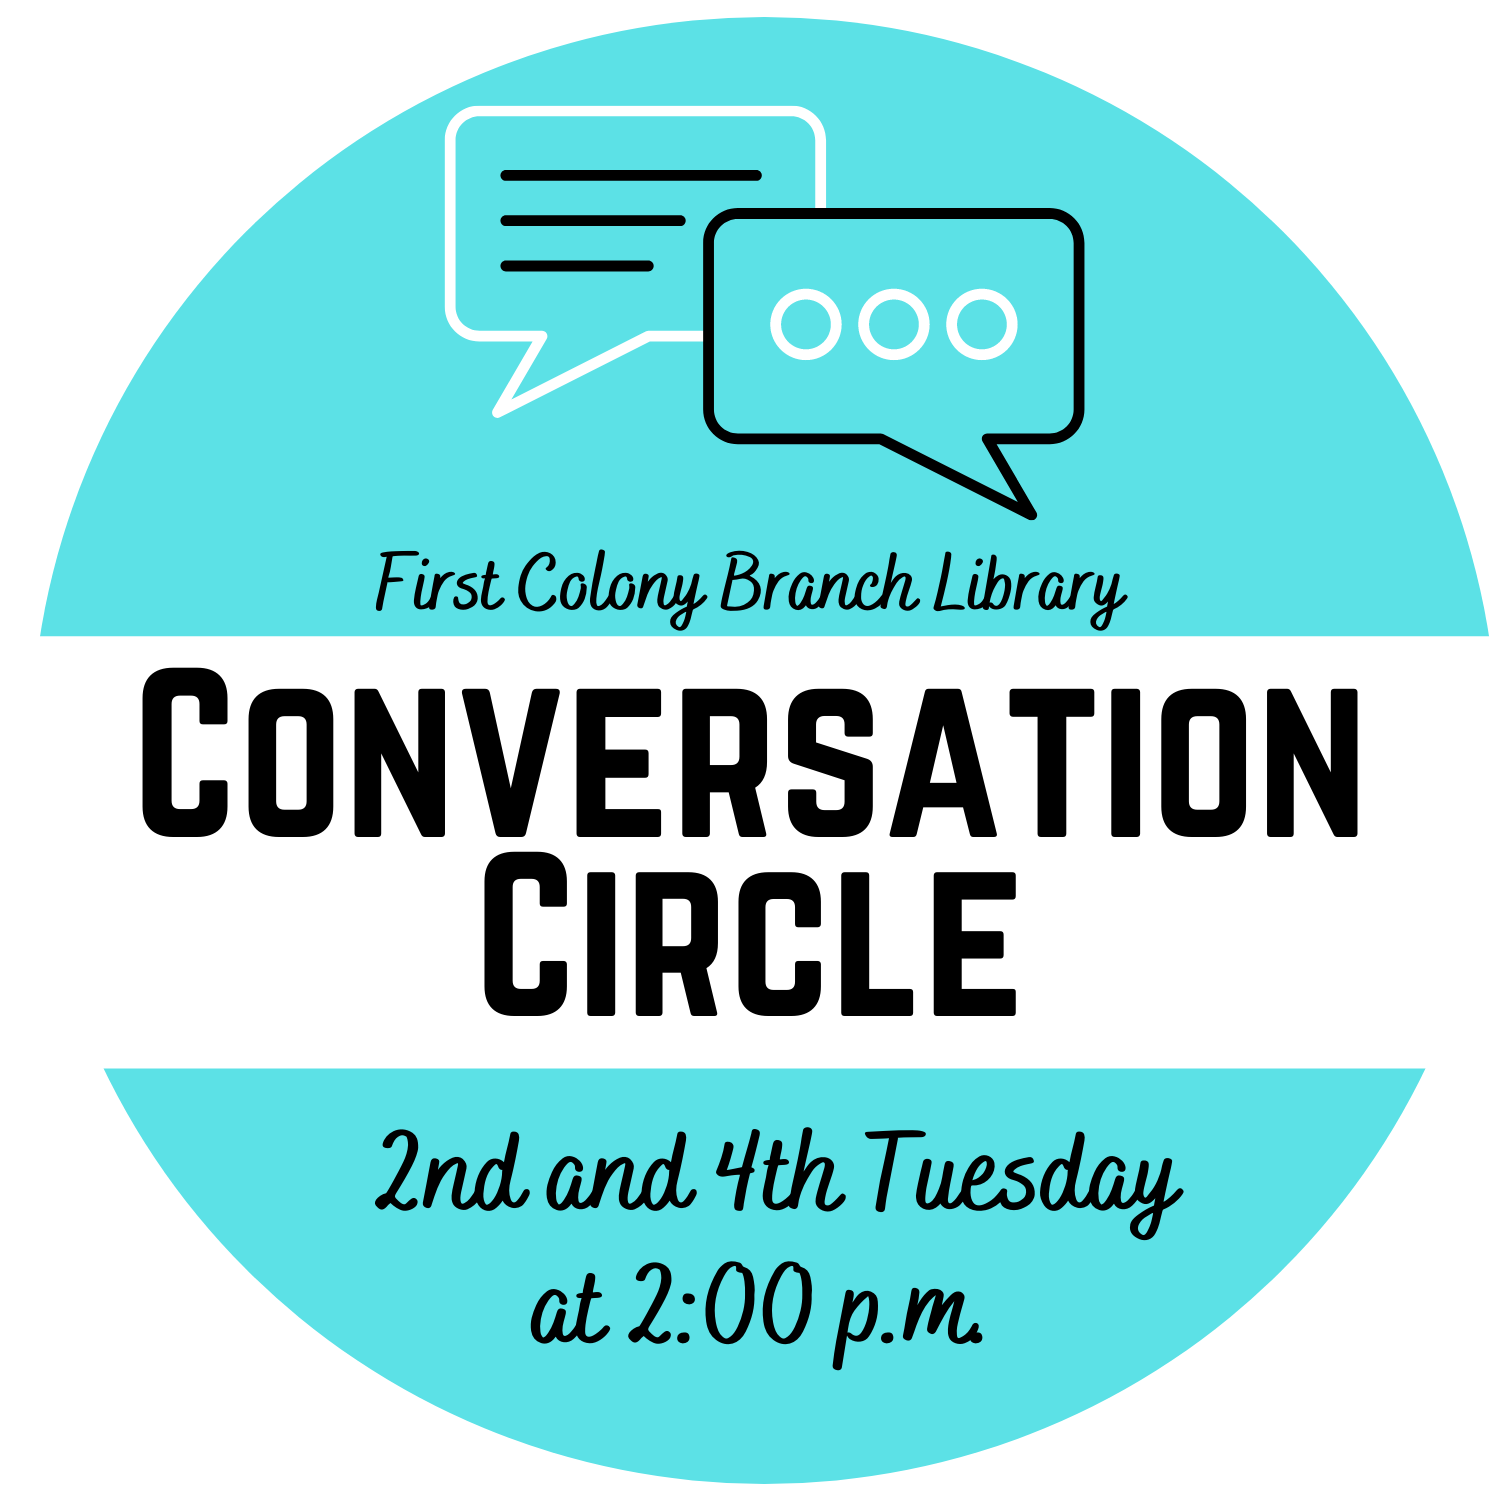 Speech bubbles and text Conversation Circle 2nd and 4th Tuesday of the month at 2pm